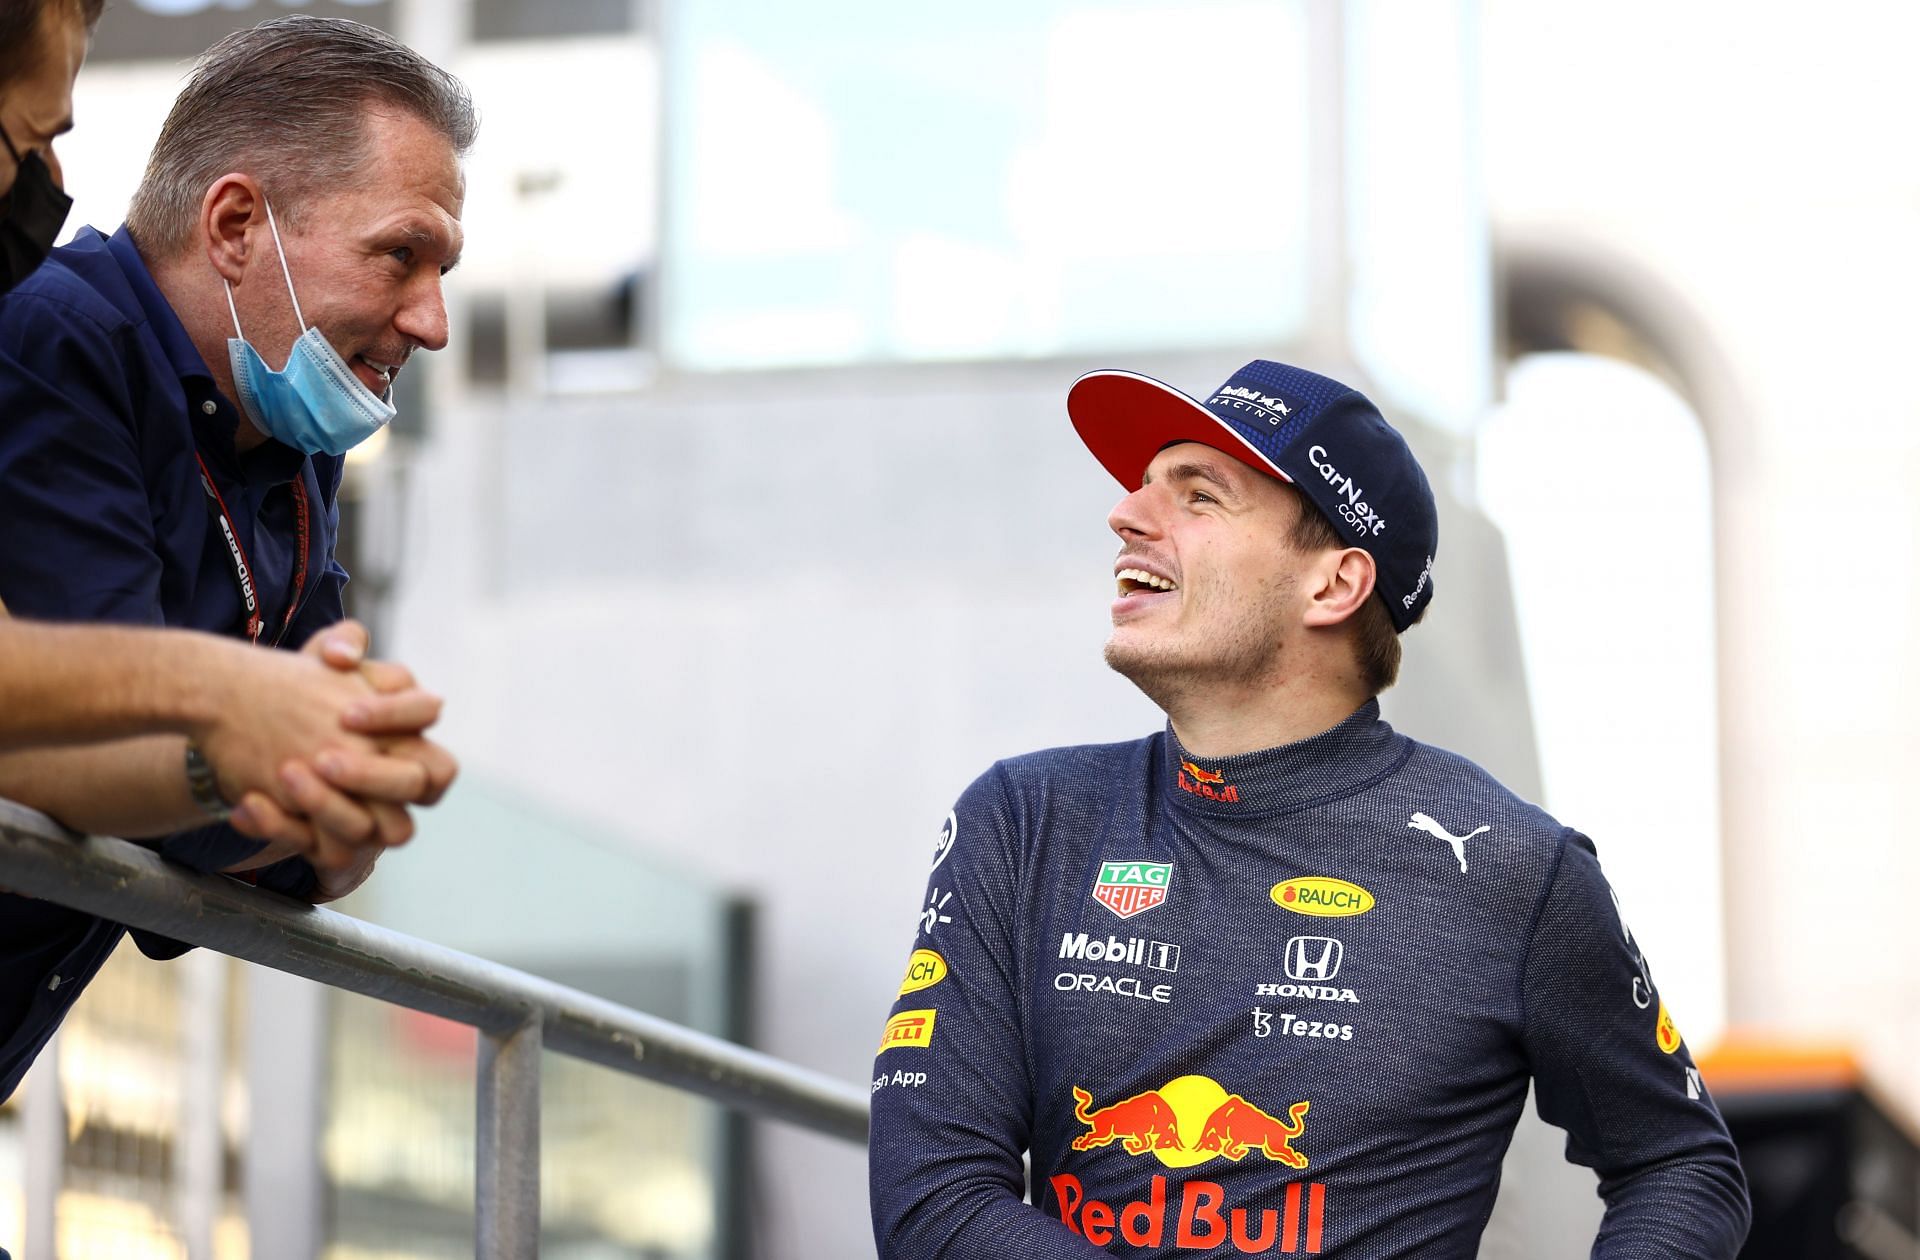 F1 Grand Prix of Abu Dhabi - Max Verstappen (right) with his father Jos (left)